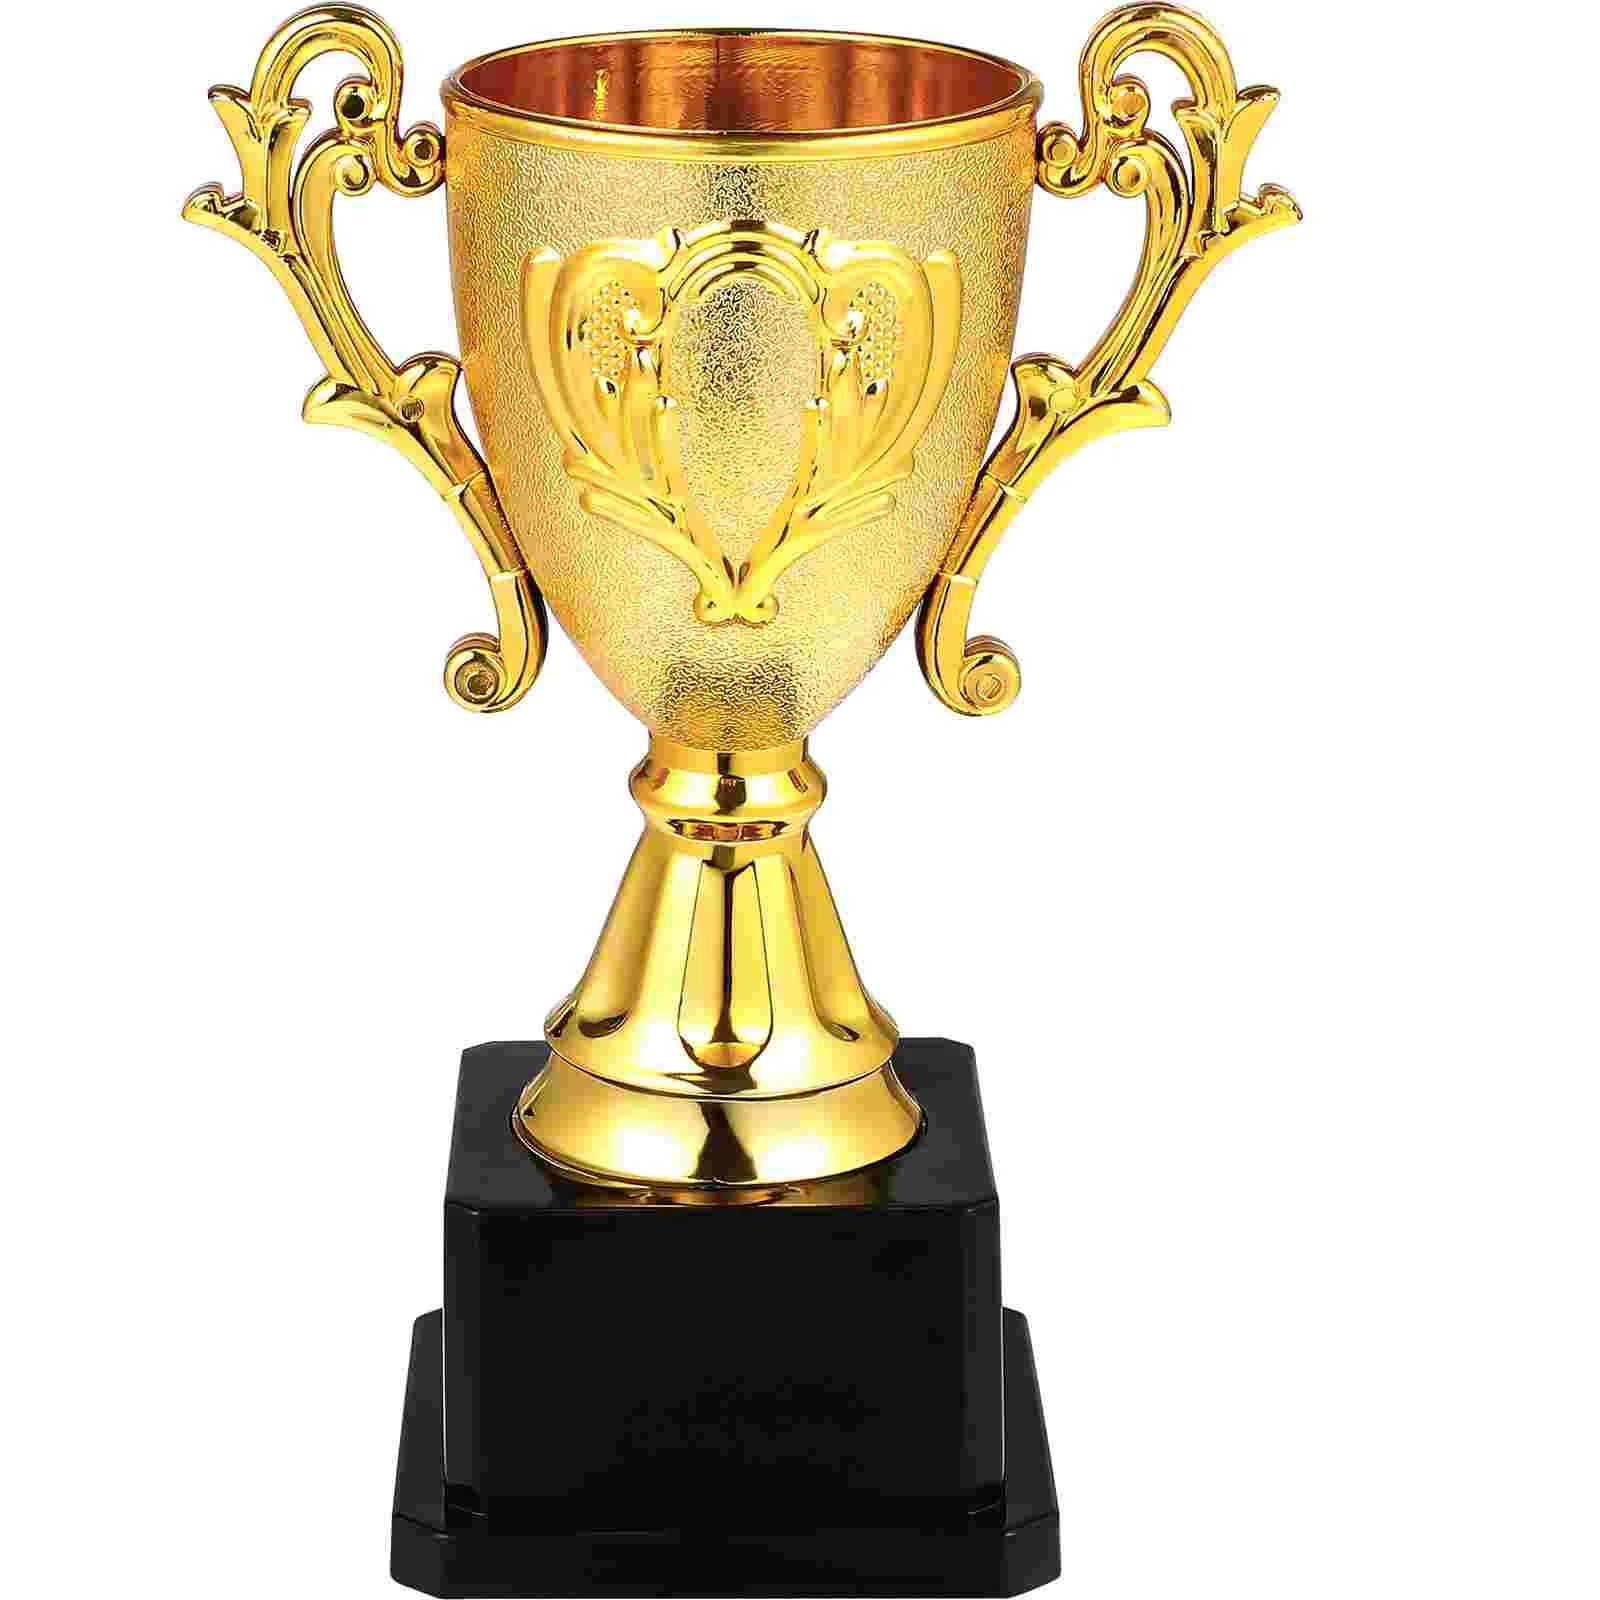 

1 Pc Fine Workmanship Lightweight Delicate Creative Fashion Personal Award Trophy Trophy Cup Competition Trophy Award Trophy